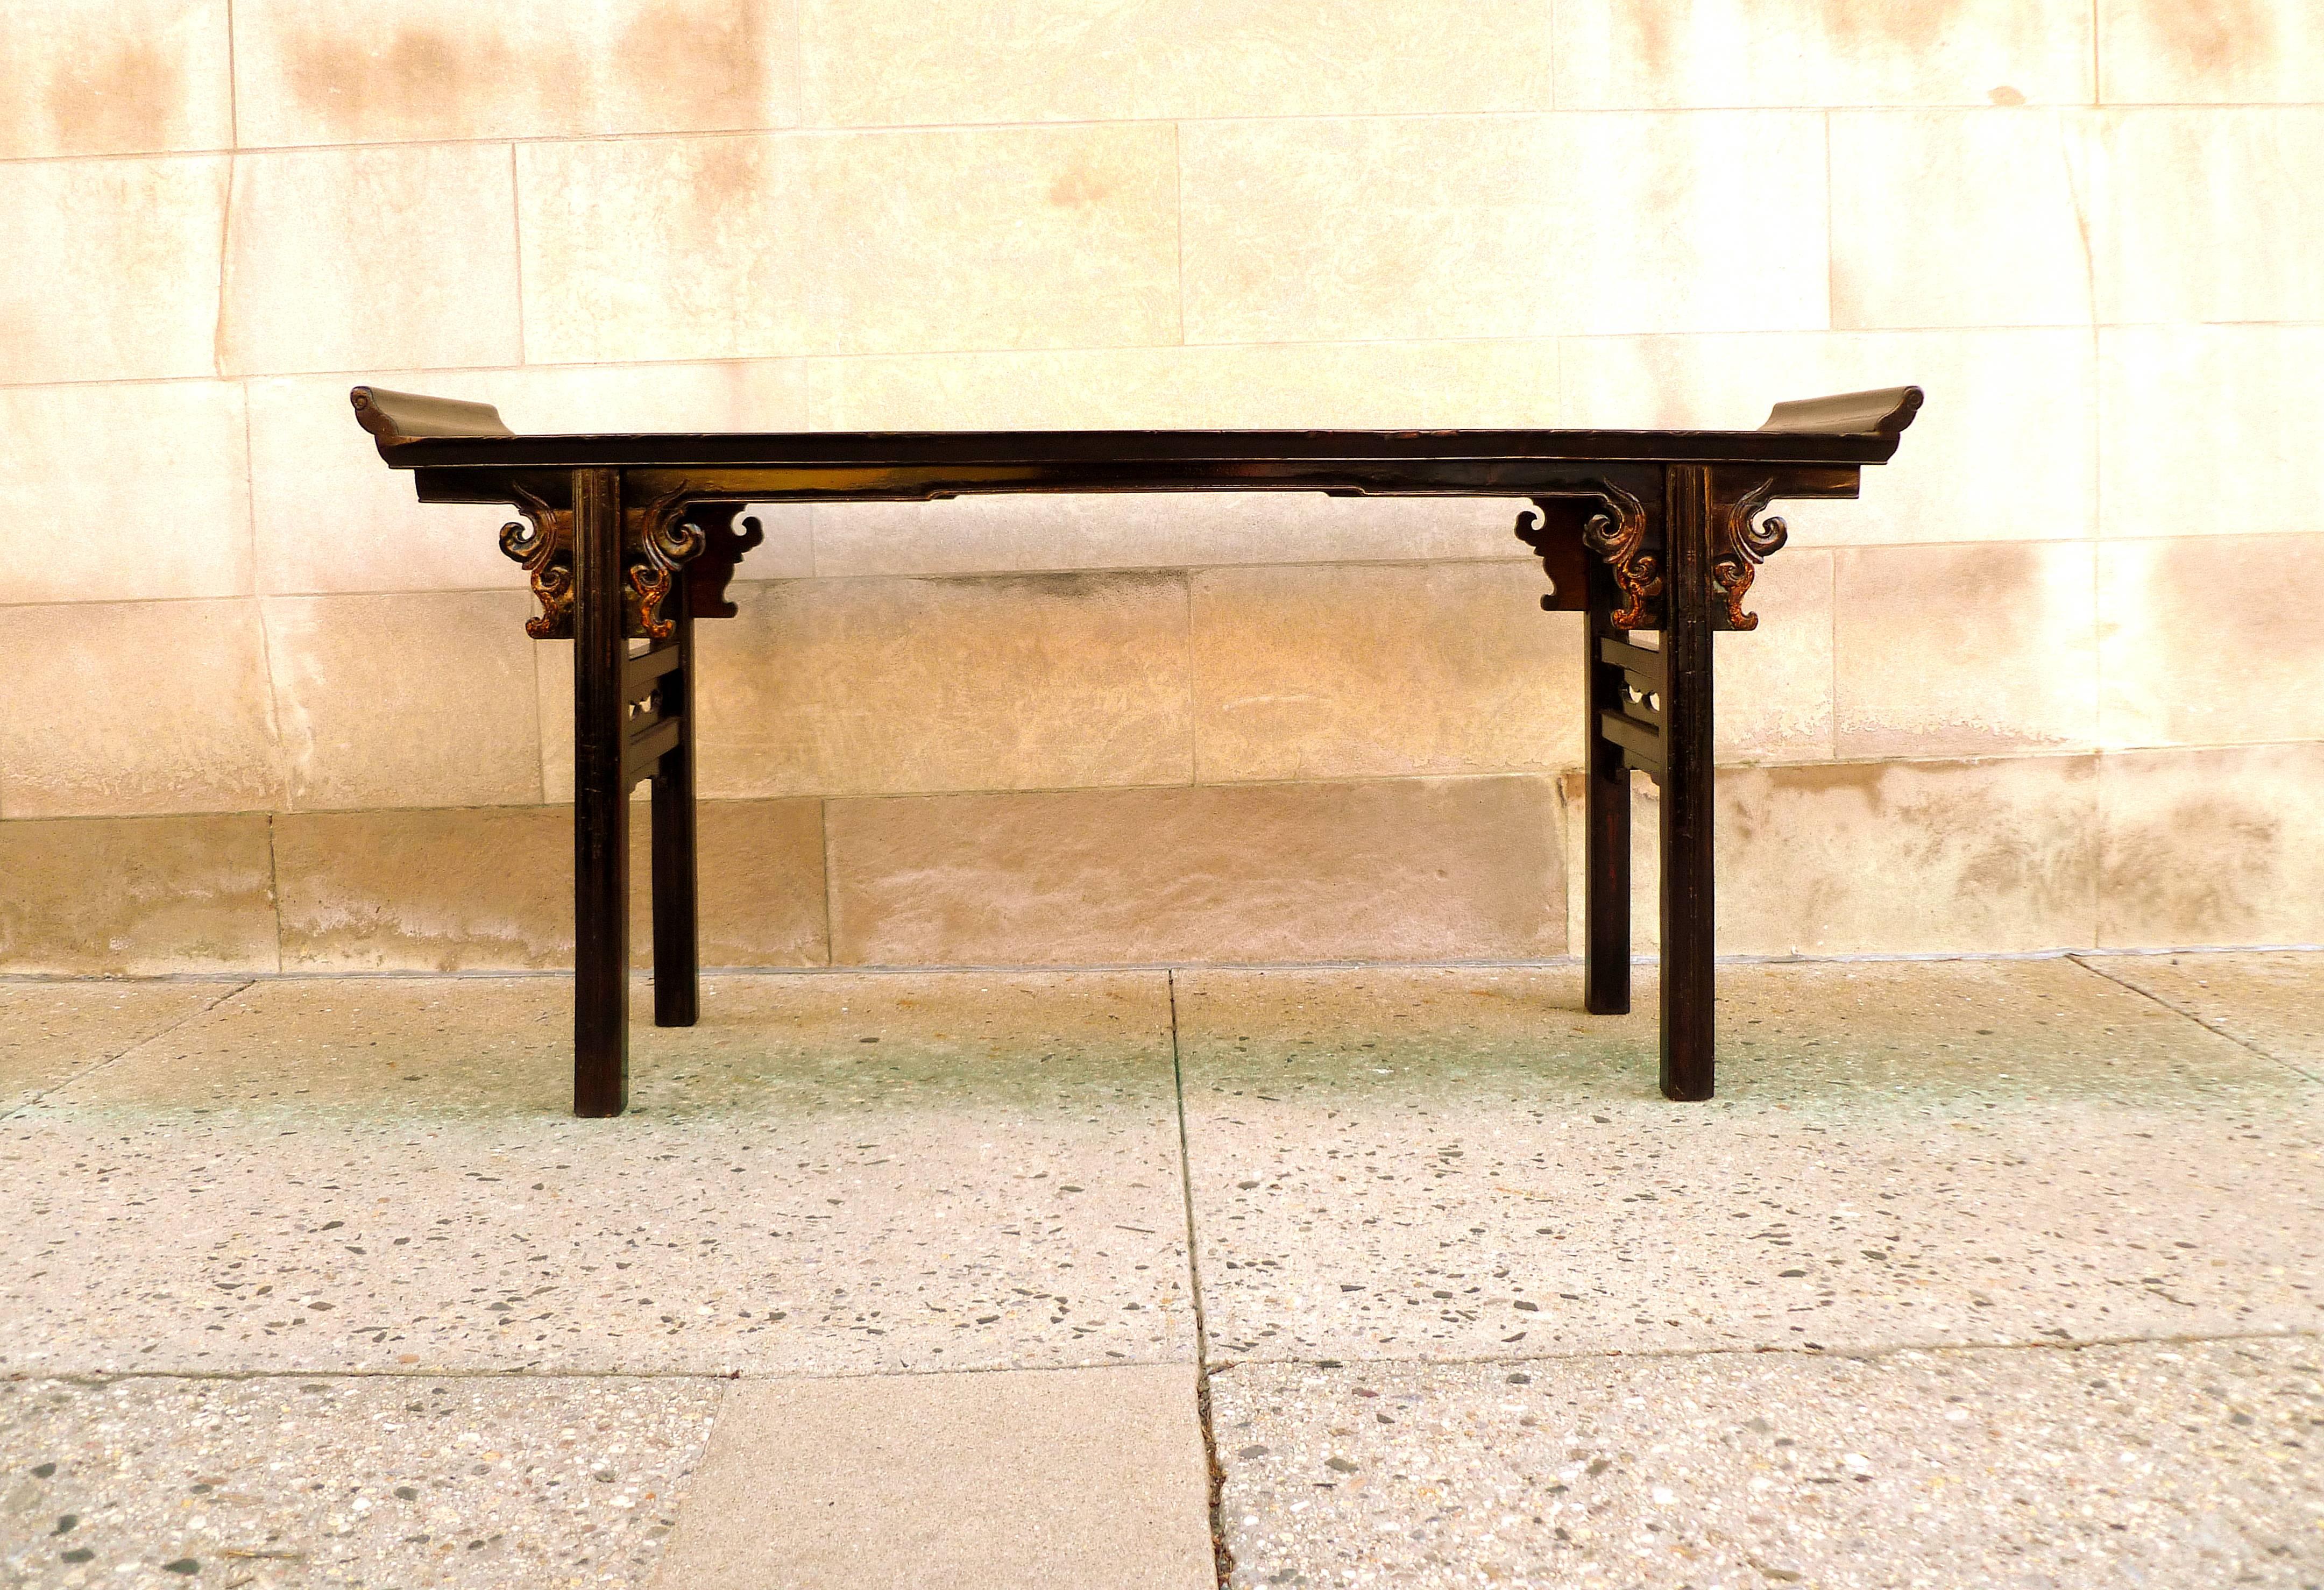 Black lacquer console table or altar table with carved spandrels. Nice detail.